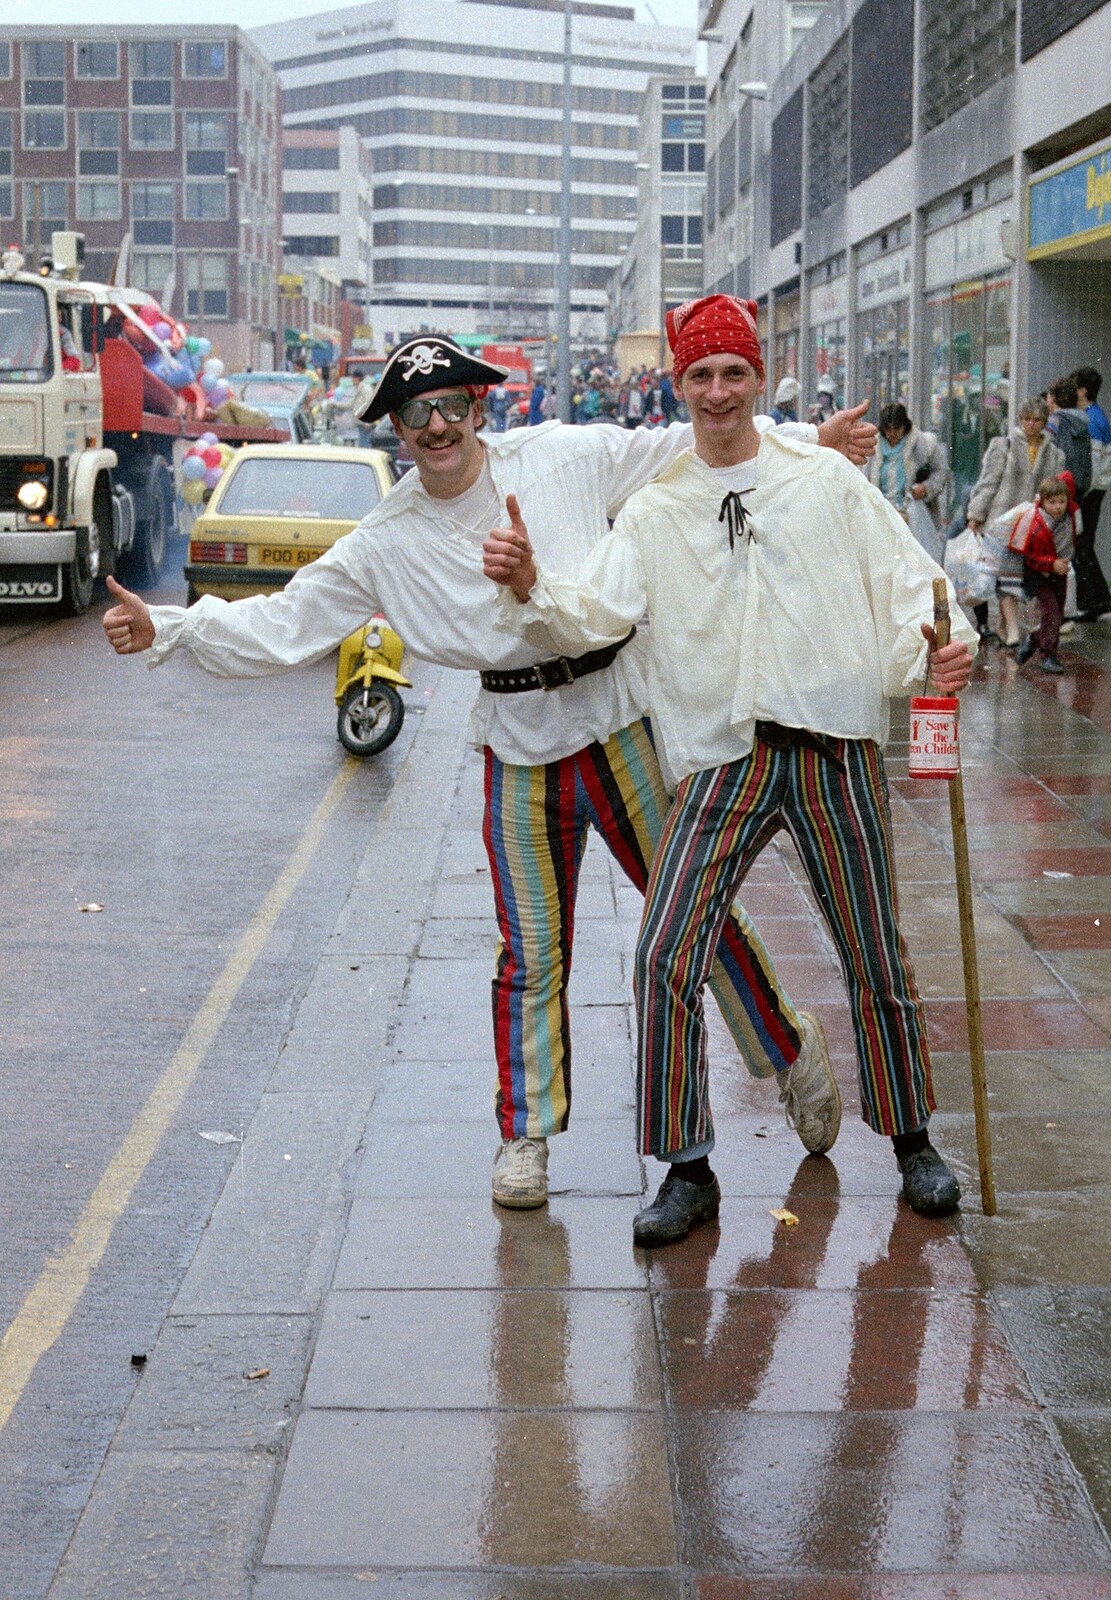 A couple of pirates on Mayflower Street from Uni: The PPSU Pirate RAG Parade, Plymouth, Devon - 14th February 1987